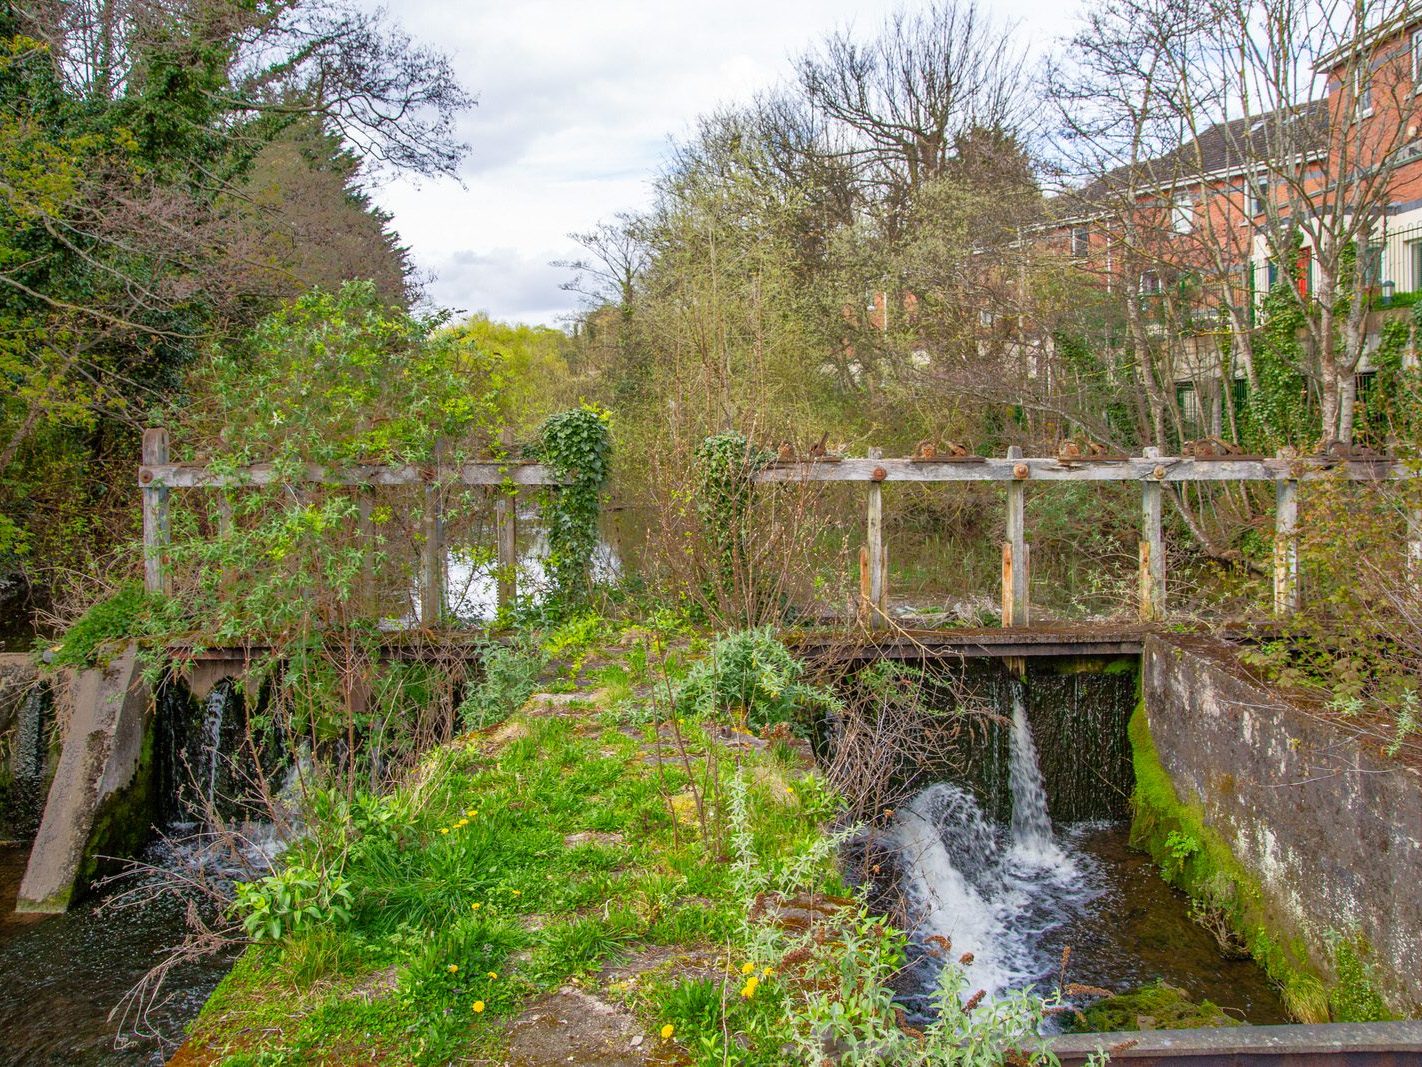 CHAPELIZOD WEIR [I WAS A BIT DISAPPOINTED BY WHAT I COULD SEE FROM MAIDEN'S ROW]-231279-1